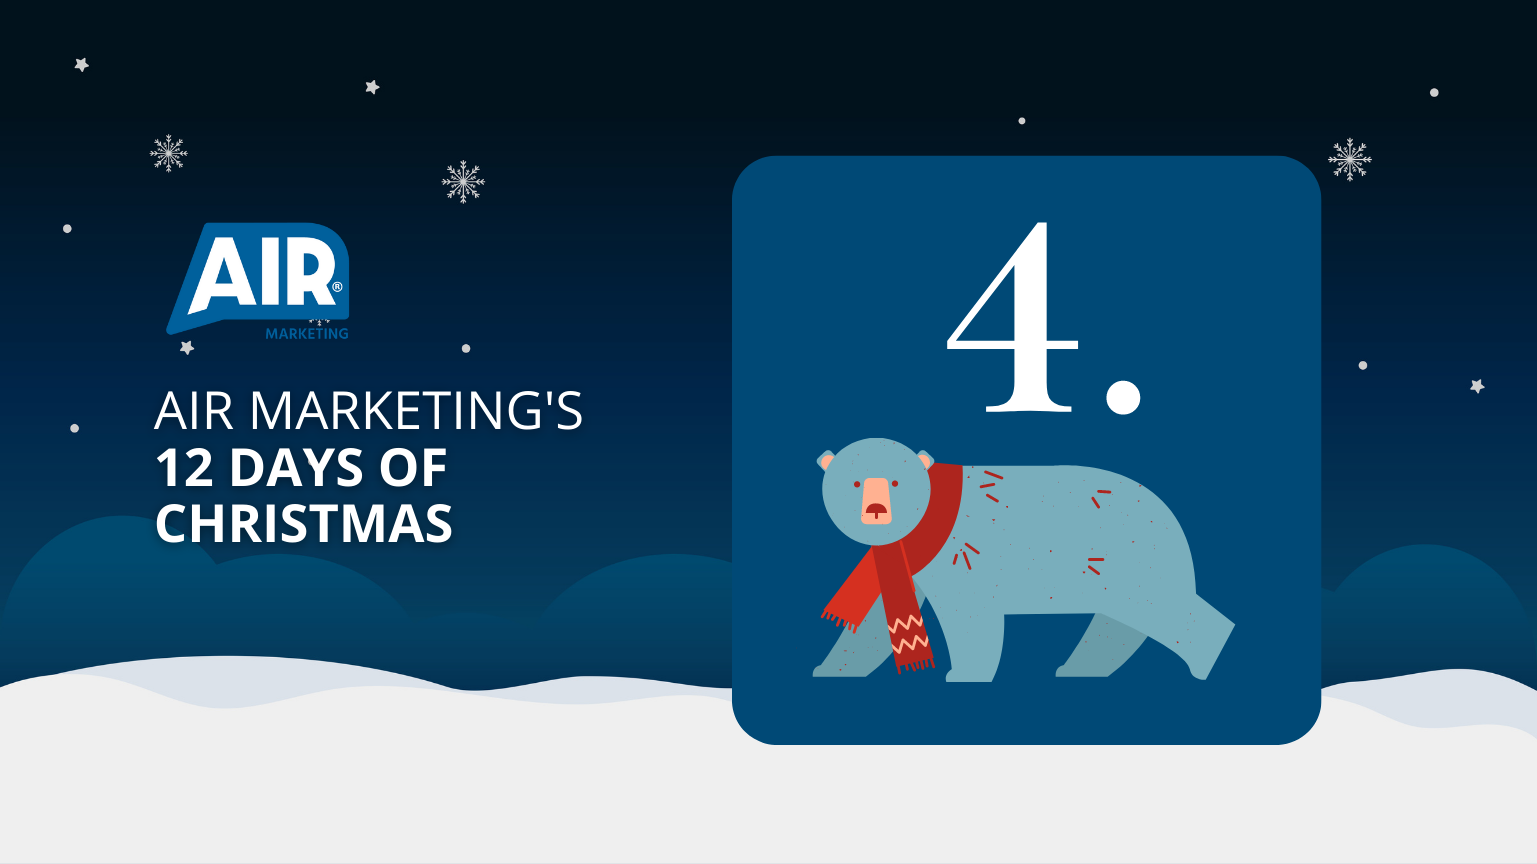 Day 4 of Air Marketing’s 12 Days of Christmas: LinkedIn Campaign Checklist